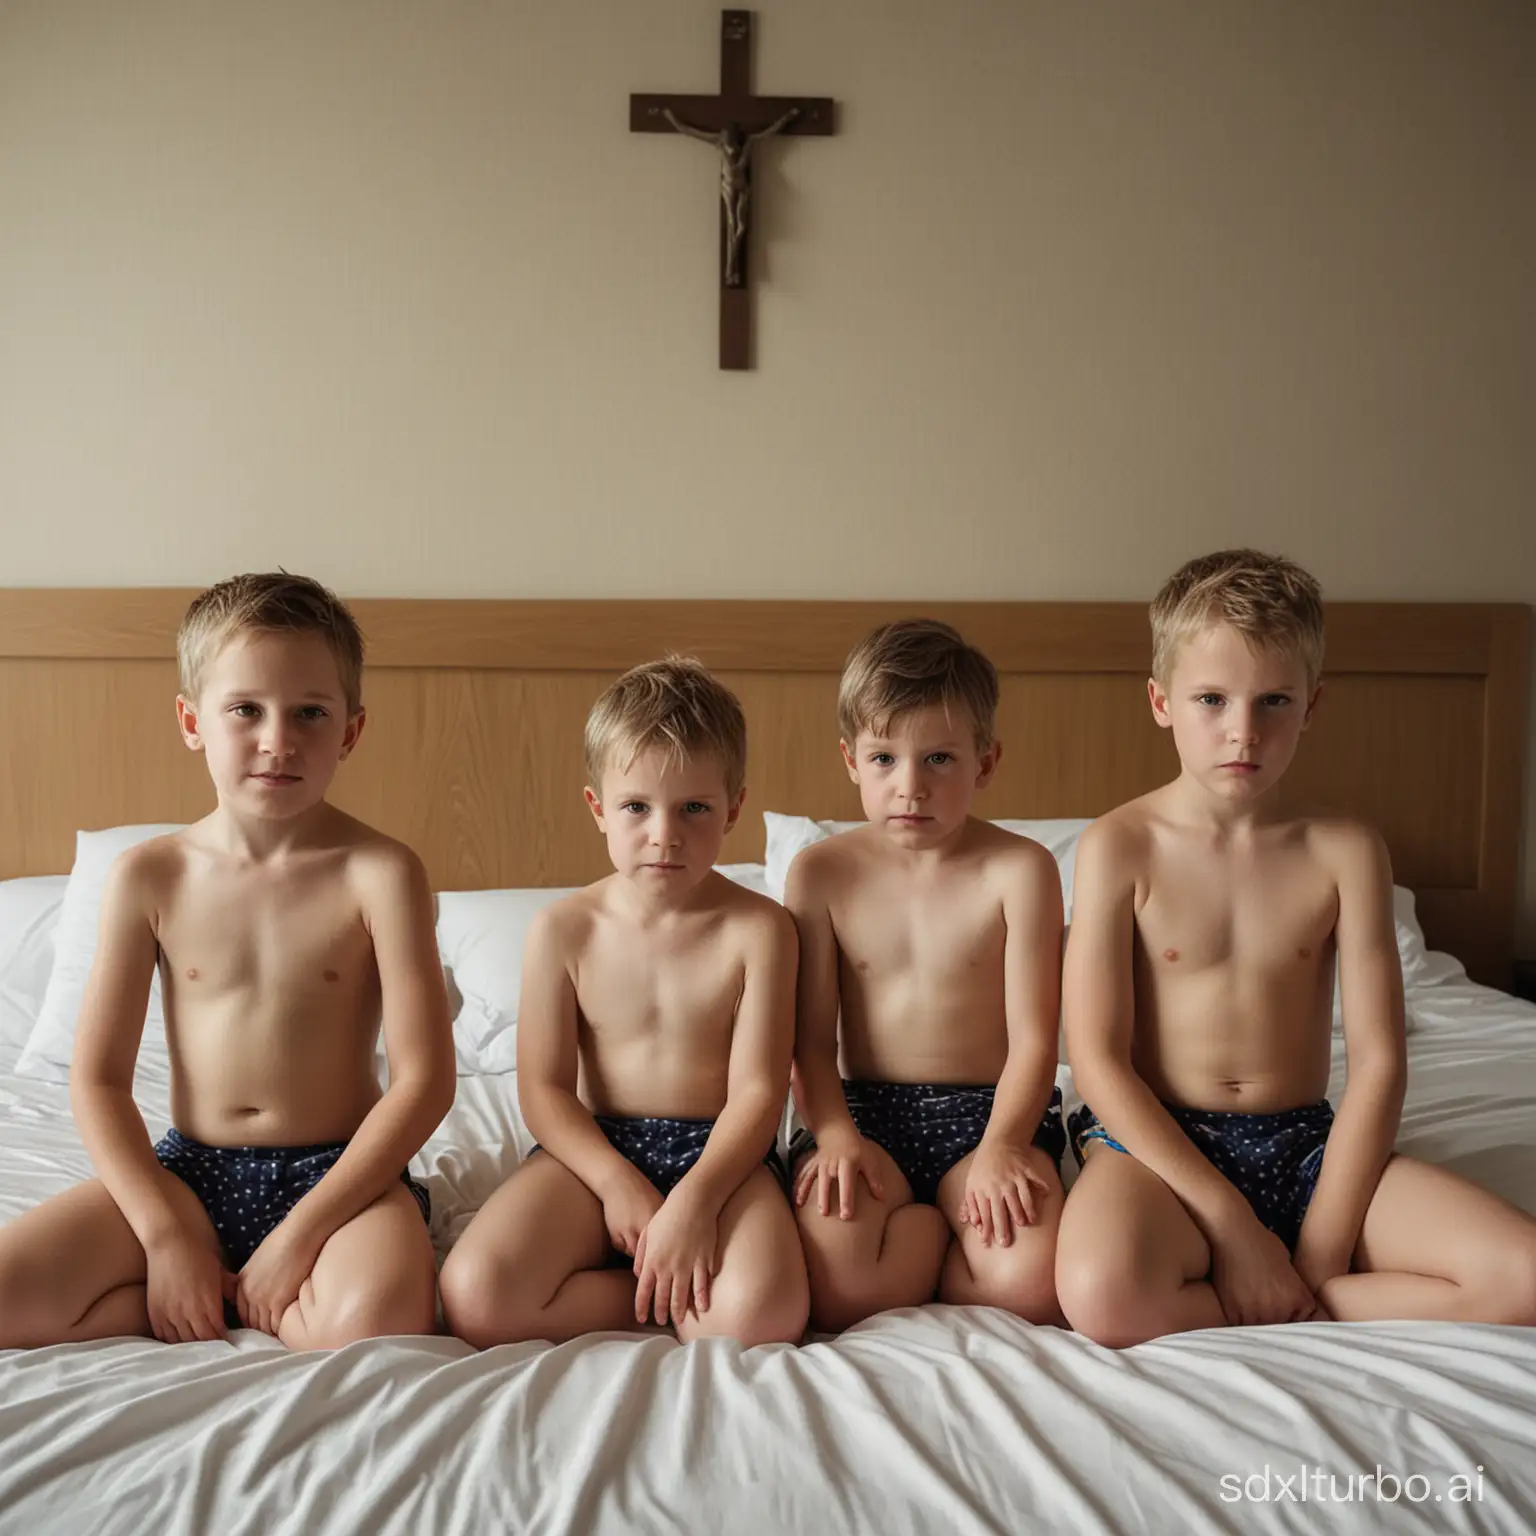 SixYearOld-Boys-and-Priests-Sharing-Moments-in-Hotel-Room-with-Gloomy-Lighting